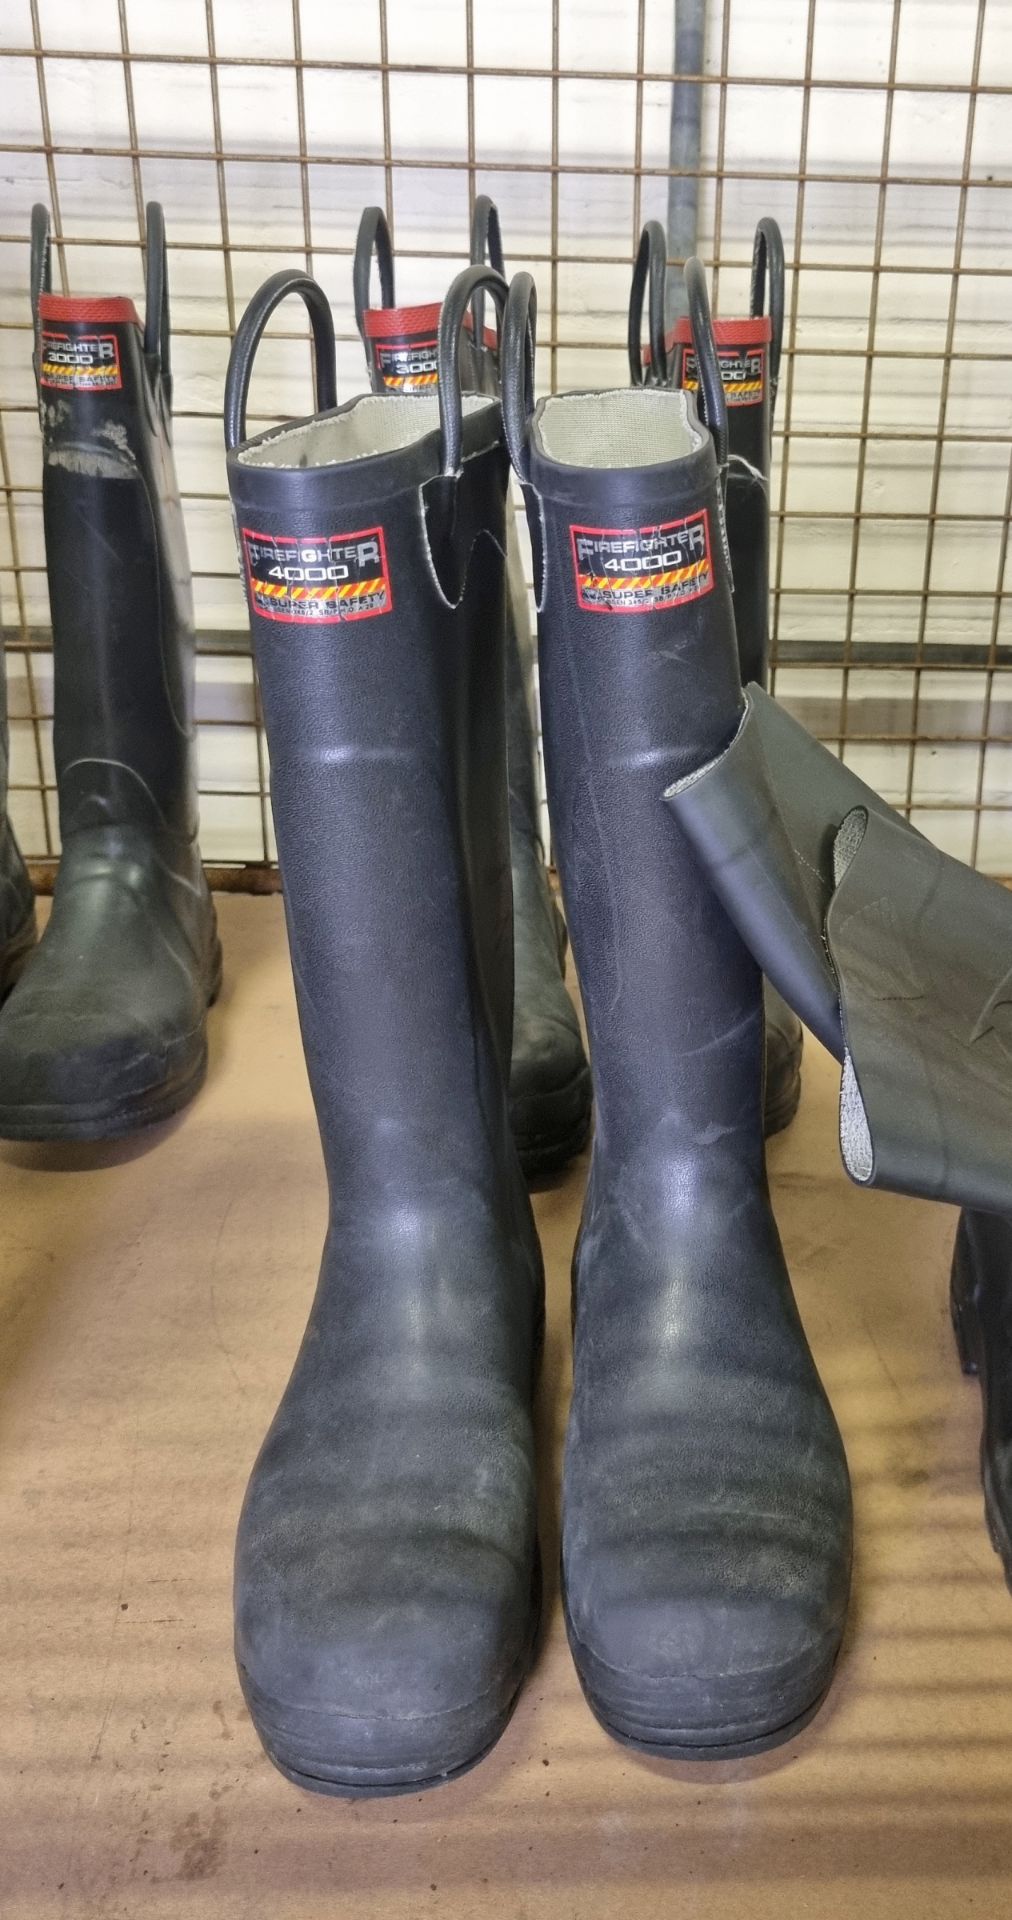 3x FF 3000 rubber safety boot - size 4, FF 3000 rubber safety boot - size 6, FF 3000 rubber safety b - Image 4 of 6